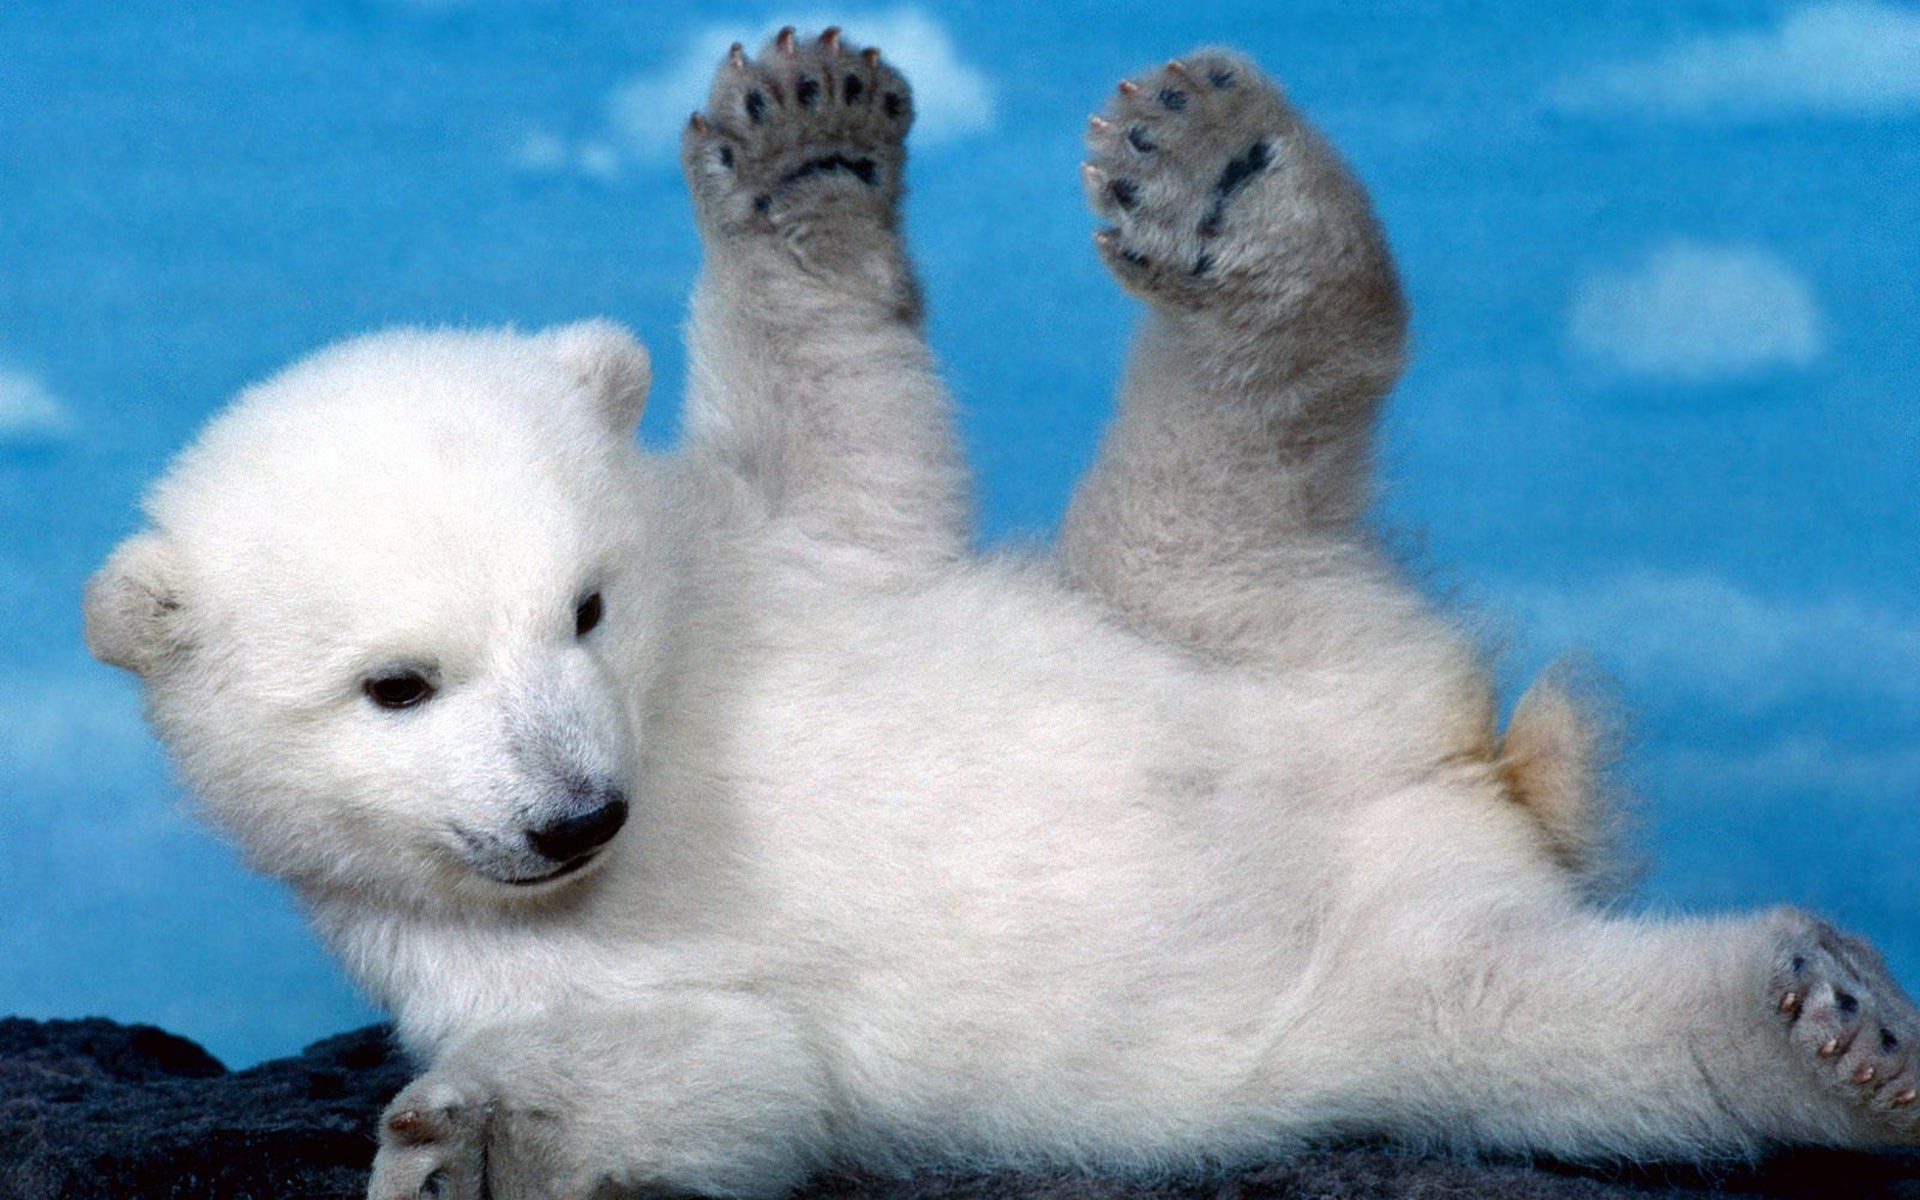 white, Cubs, Skyscapes, Polar, Bears, Furry, Baby, Animals Wallpaper